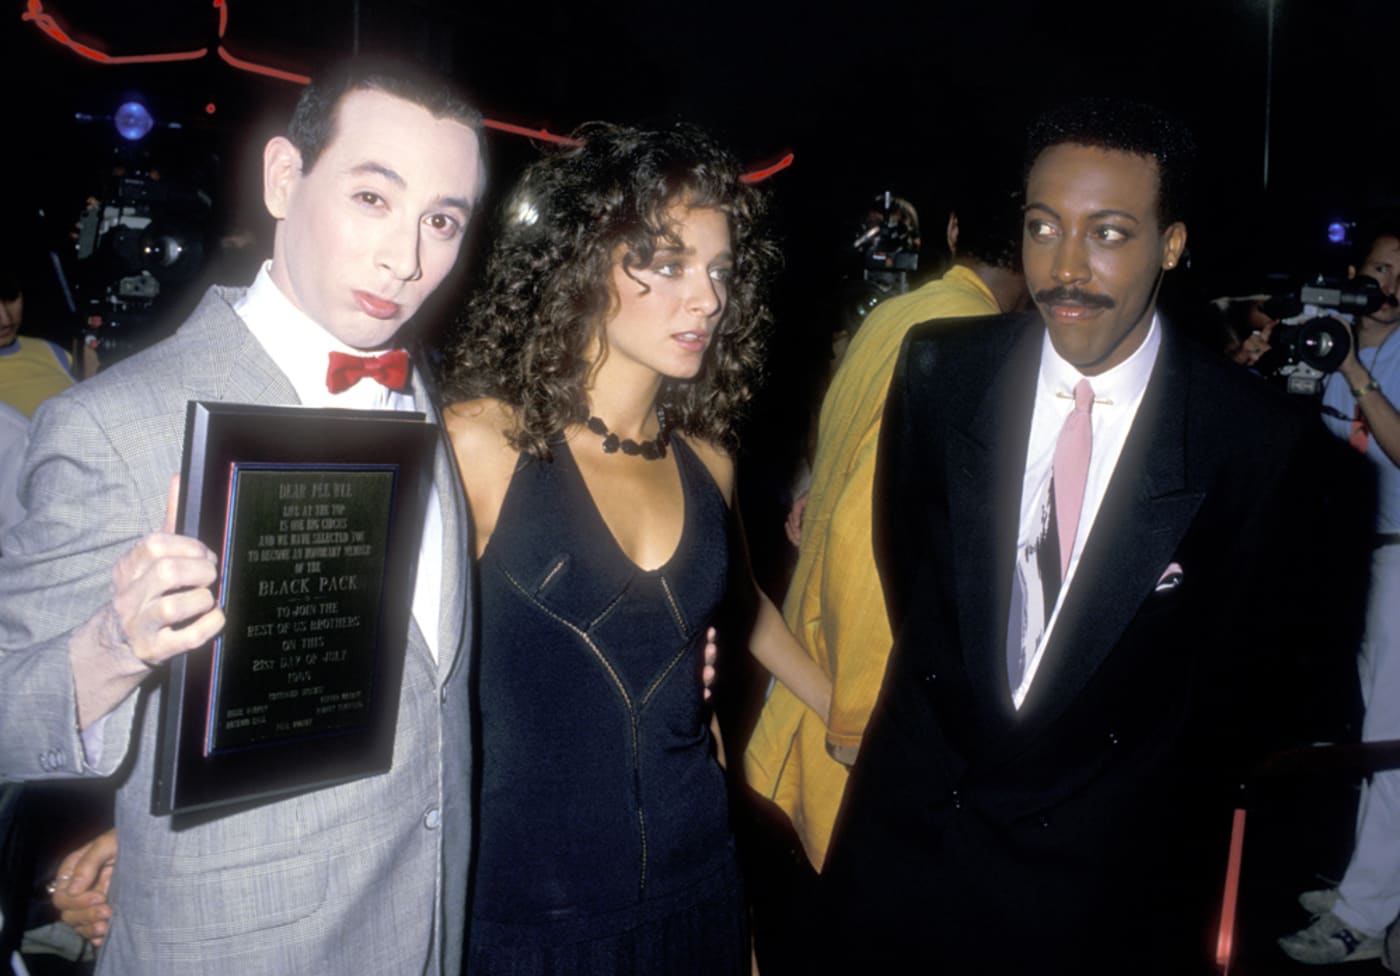 Paul Reubens, Valeria Golino, and Arsenio Hall attend the Big Top Pee wee Hollywood Premiere